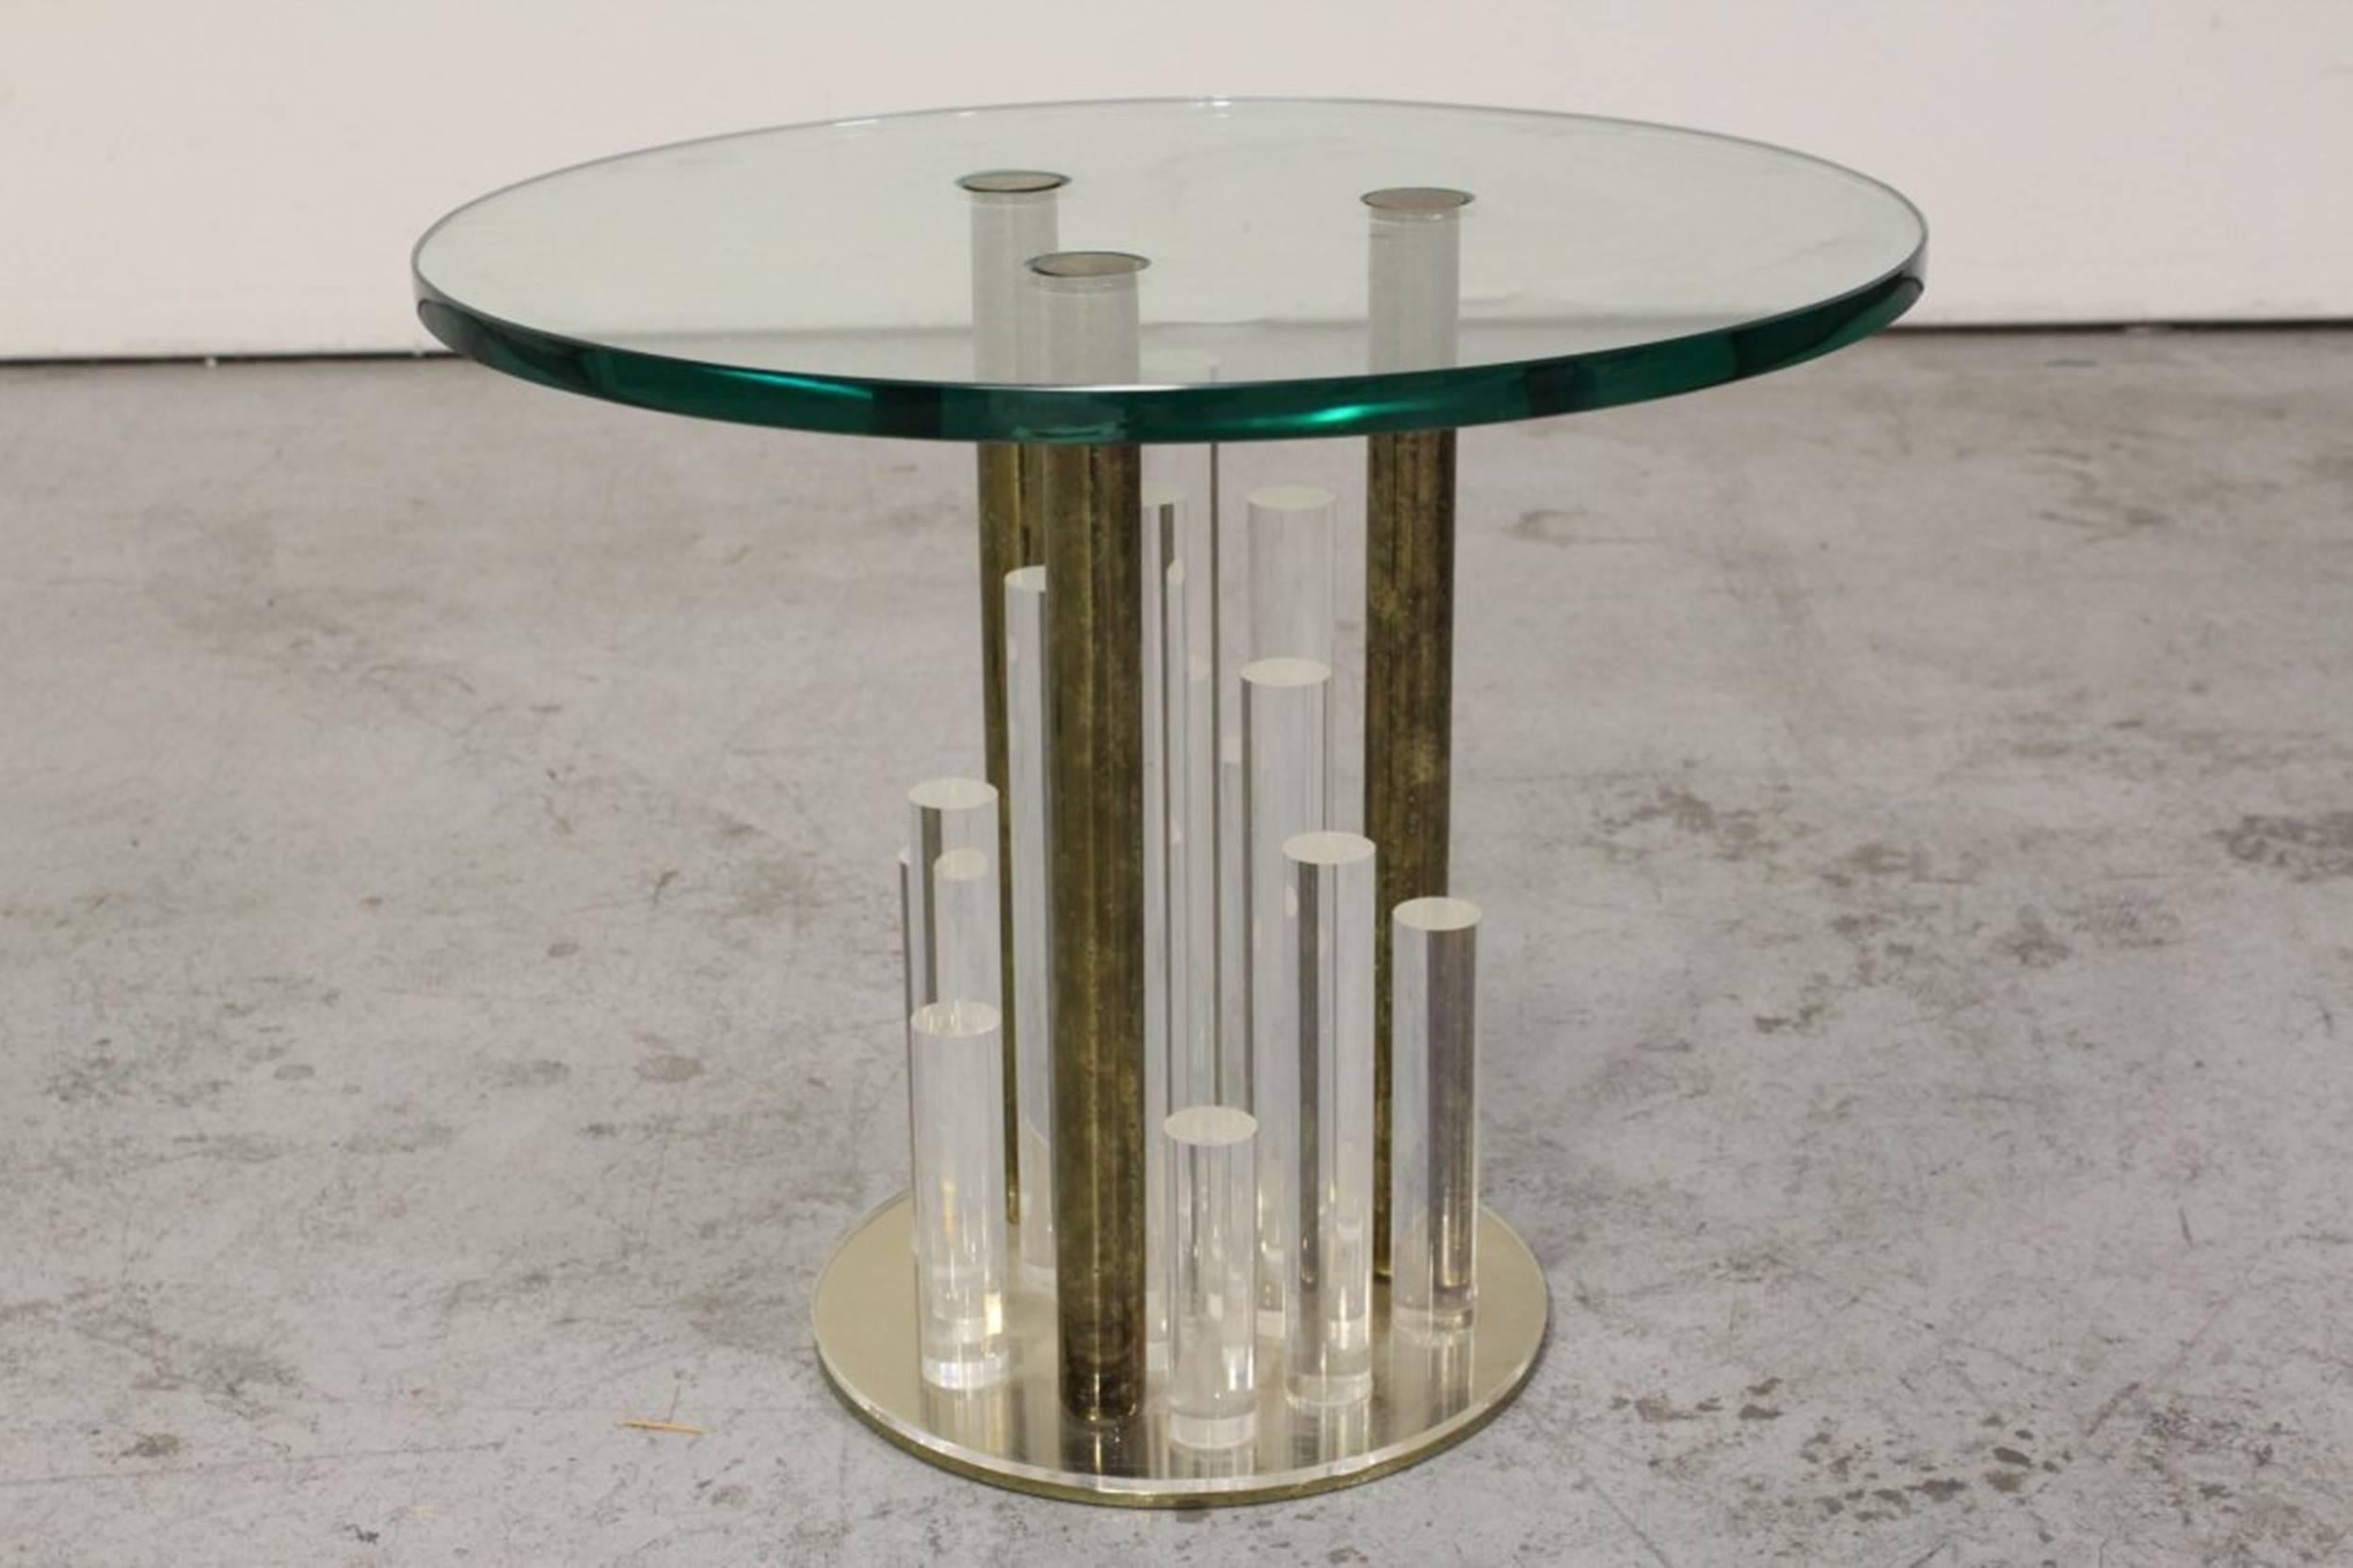 Beautiful set of side tables in Lucite and brass designed and manufactured by Charles Hollis Jones in the early 1970s.
These 